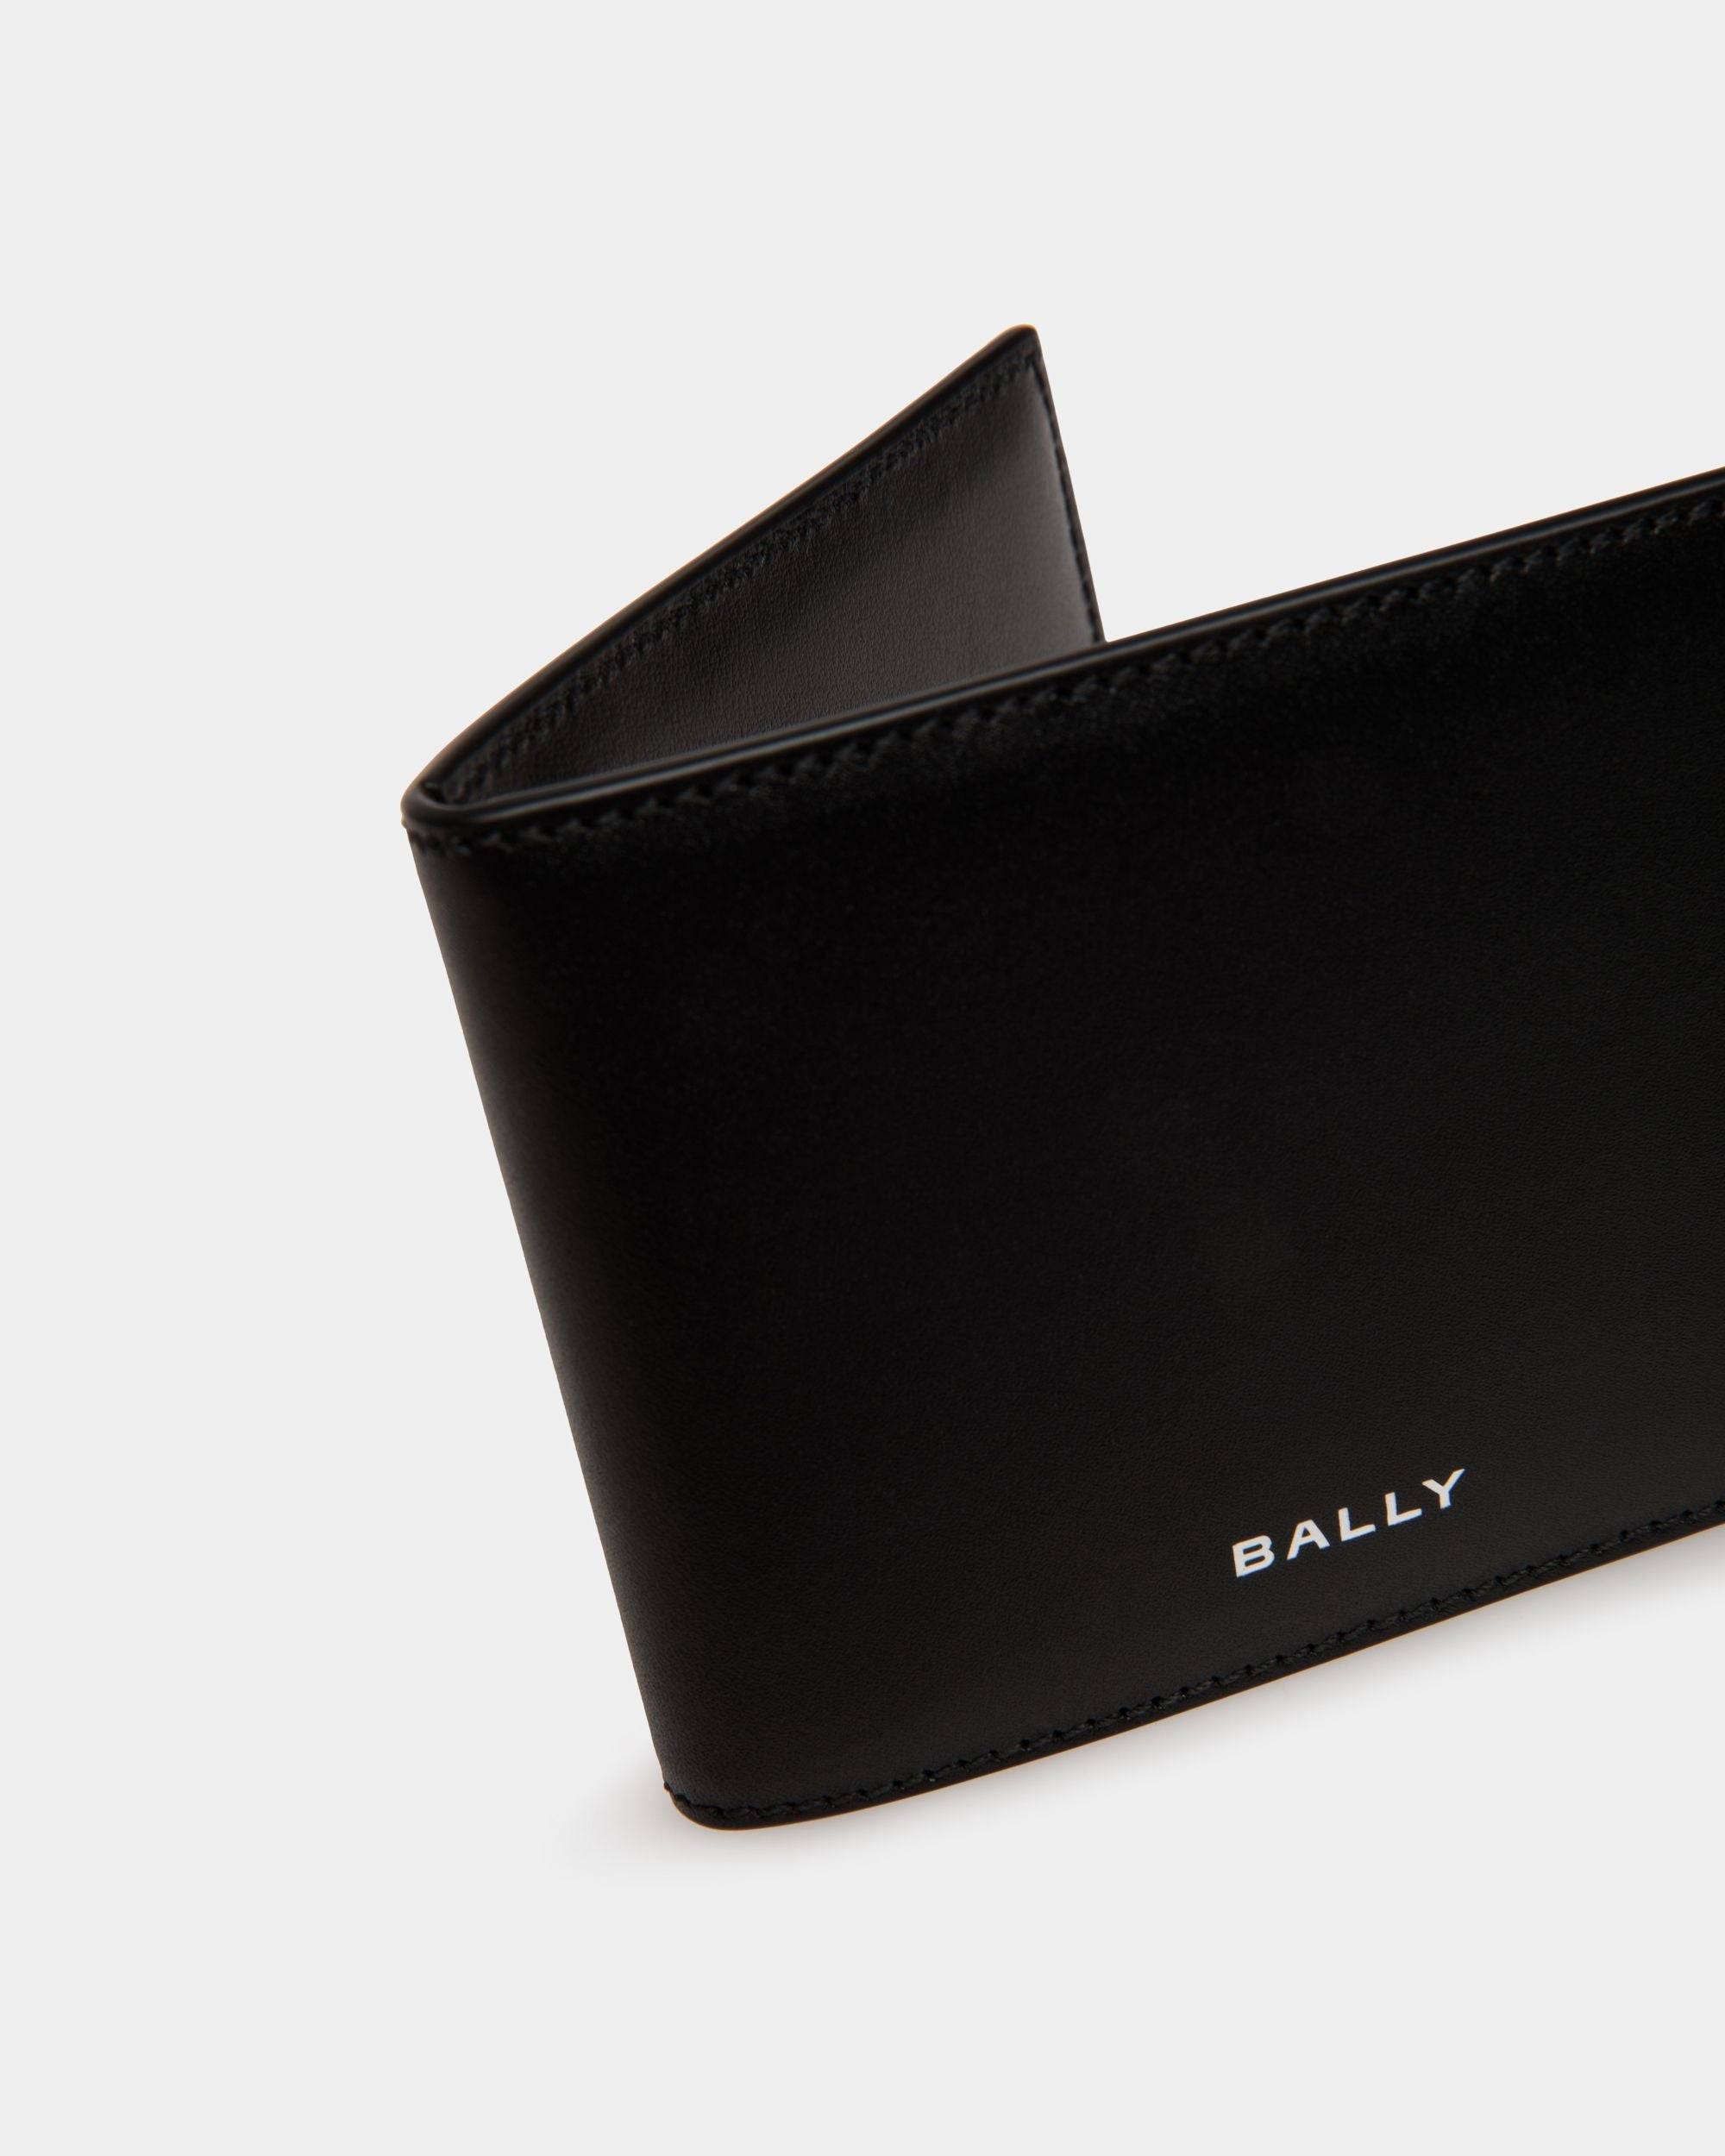 Busy Bally | Men's Bifold Wallet in Black Leather | Bally | Still Life Detail